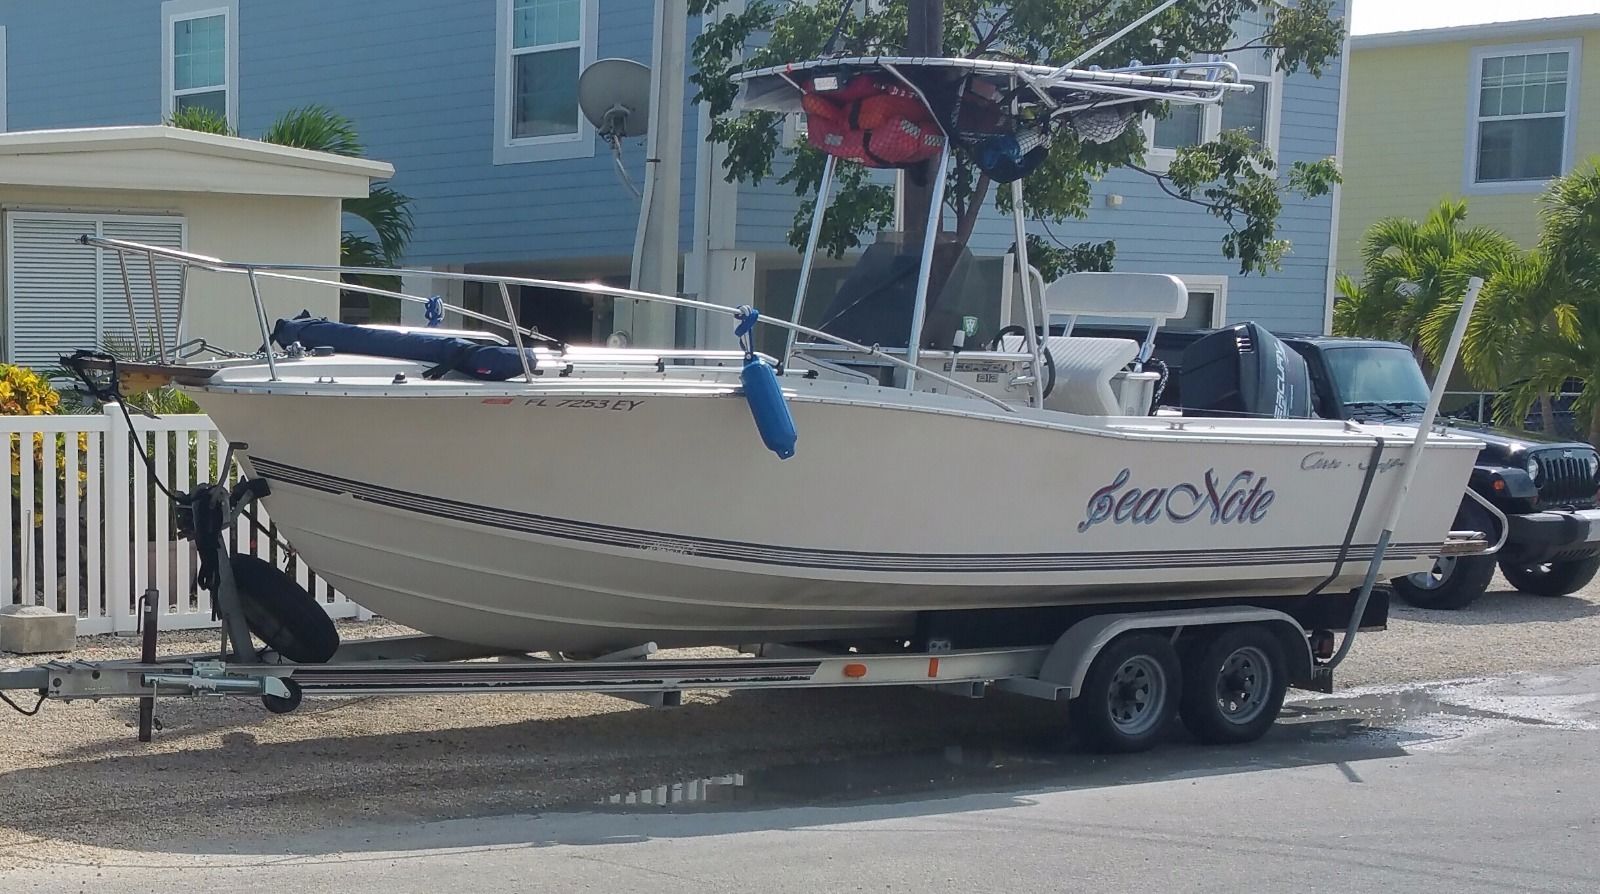 Chris Craft Scorpion 1986 for sale for $10,000 - Boats ...